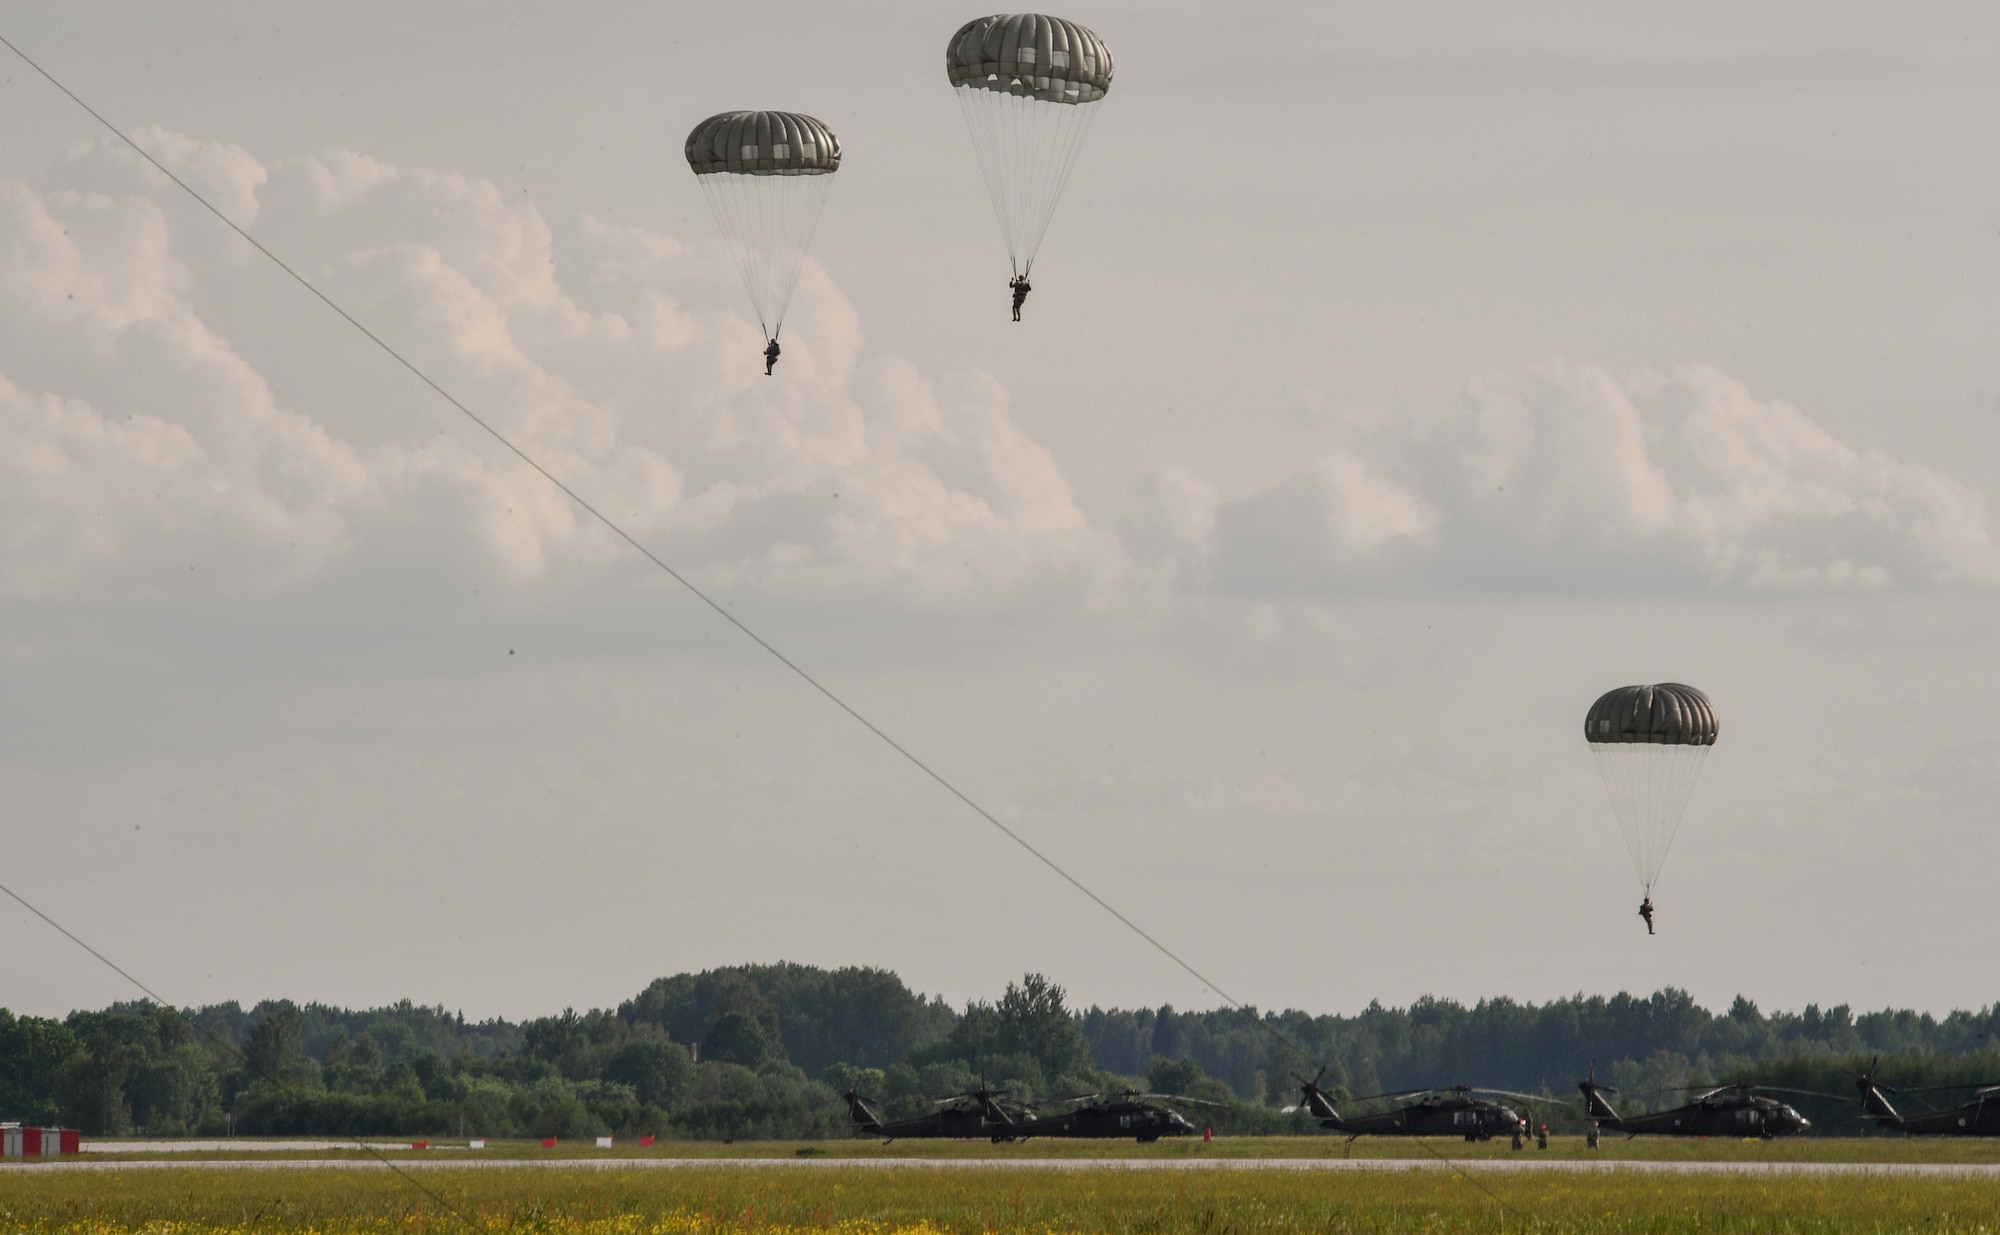 U.S. Air Force Airmen assigned to the 435th Contingency Response Group float to the ground after jumping from a U.S. Army CH-47 Chinook for the 435th Contingency Response Group’s sling load during exercise Saber Strike 17 at Lielvarde Air Base, Latvia, June 10, 2017. The 435th CRG sends paratroopers to austere locations to determine if an area can be safely used as an airfield. Saber Strike 17 highlights the inherent flexibility of ground and air forces to rapidly respond to crises allowing for the right presence where it is needed, when it is needed. (U.S Air Force photo by Senior Airman Tryphena Mayhugh)